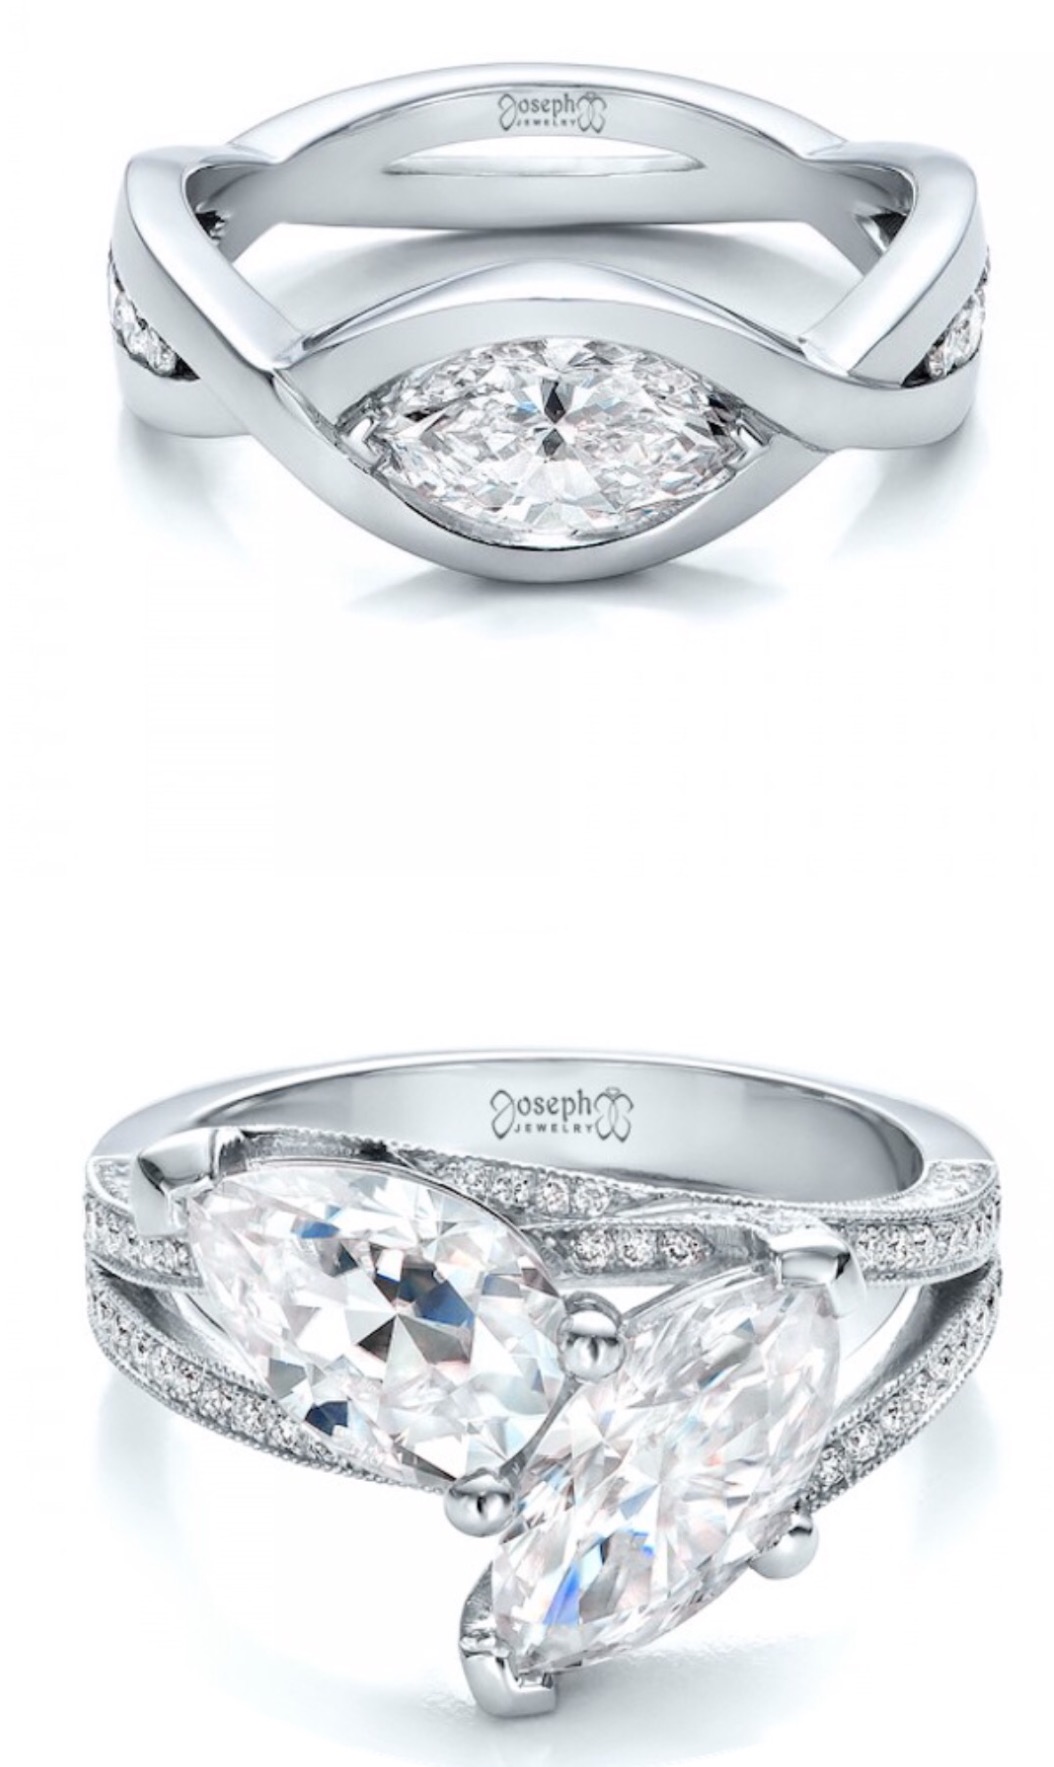 White gold engagement ring with oval center stone and an interwoven band with diamonds.